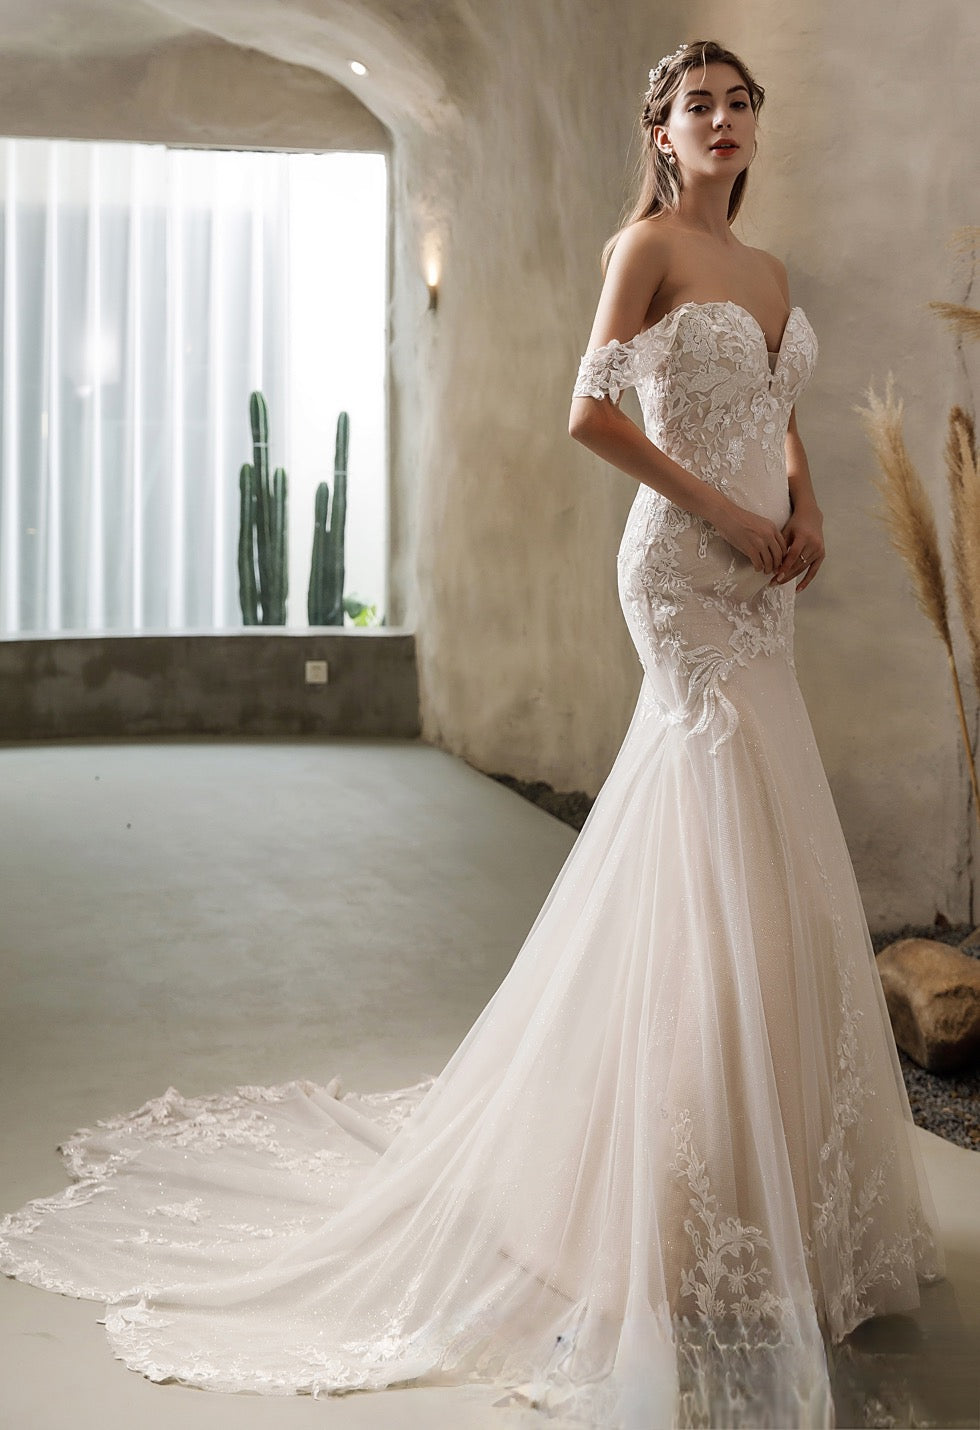 Elegant A Line Short Wedding Dress Sleeveless Lace Tea-Length Tulle Br –  TulleLux Bridal Crowns & Accessories